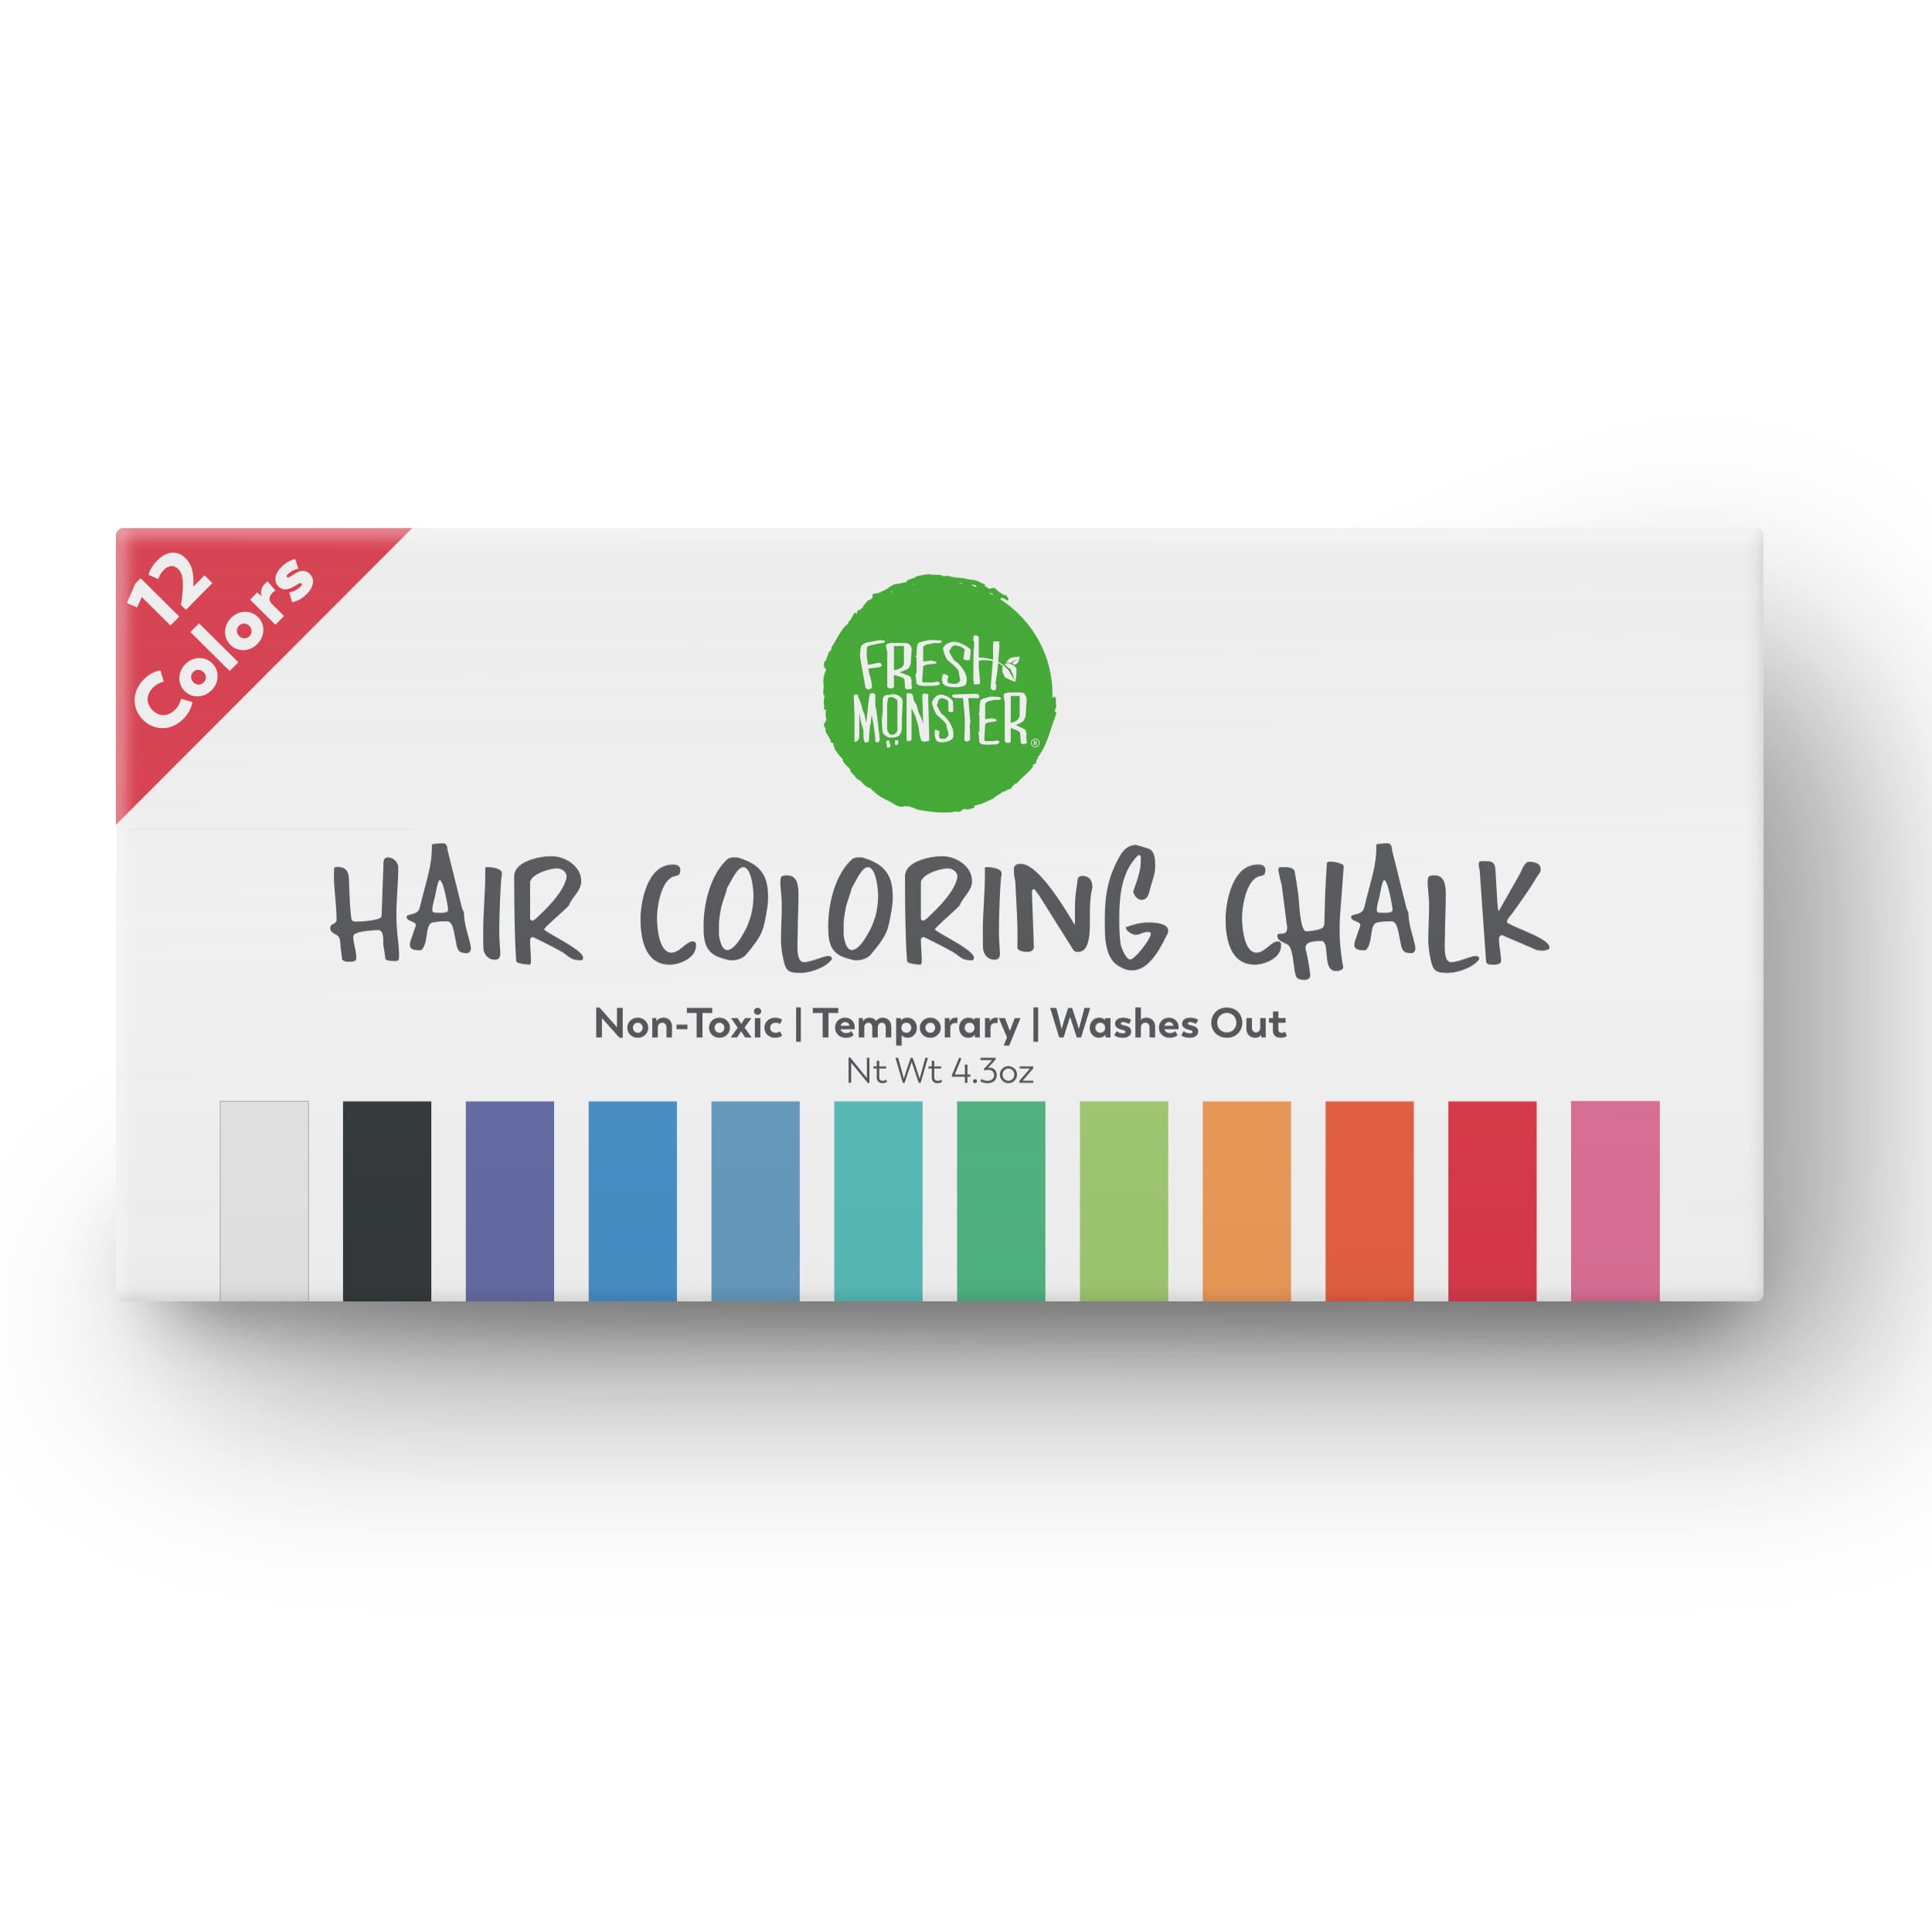 Fresh Monster Temporary Hair Coloring Chalk 12 Bright Colors Washes Out Easily Girls and Boys Non-Toxic and Safe for All Ages Hair Colors and Textures